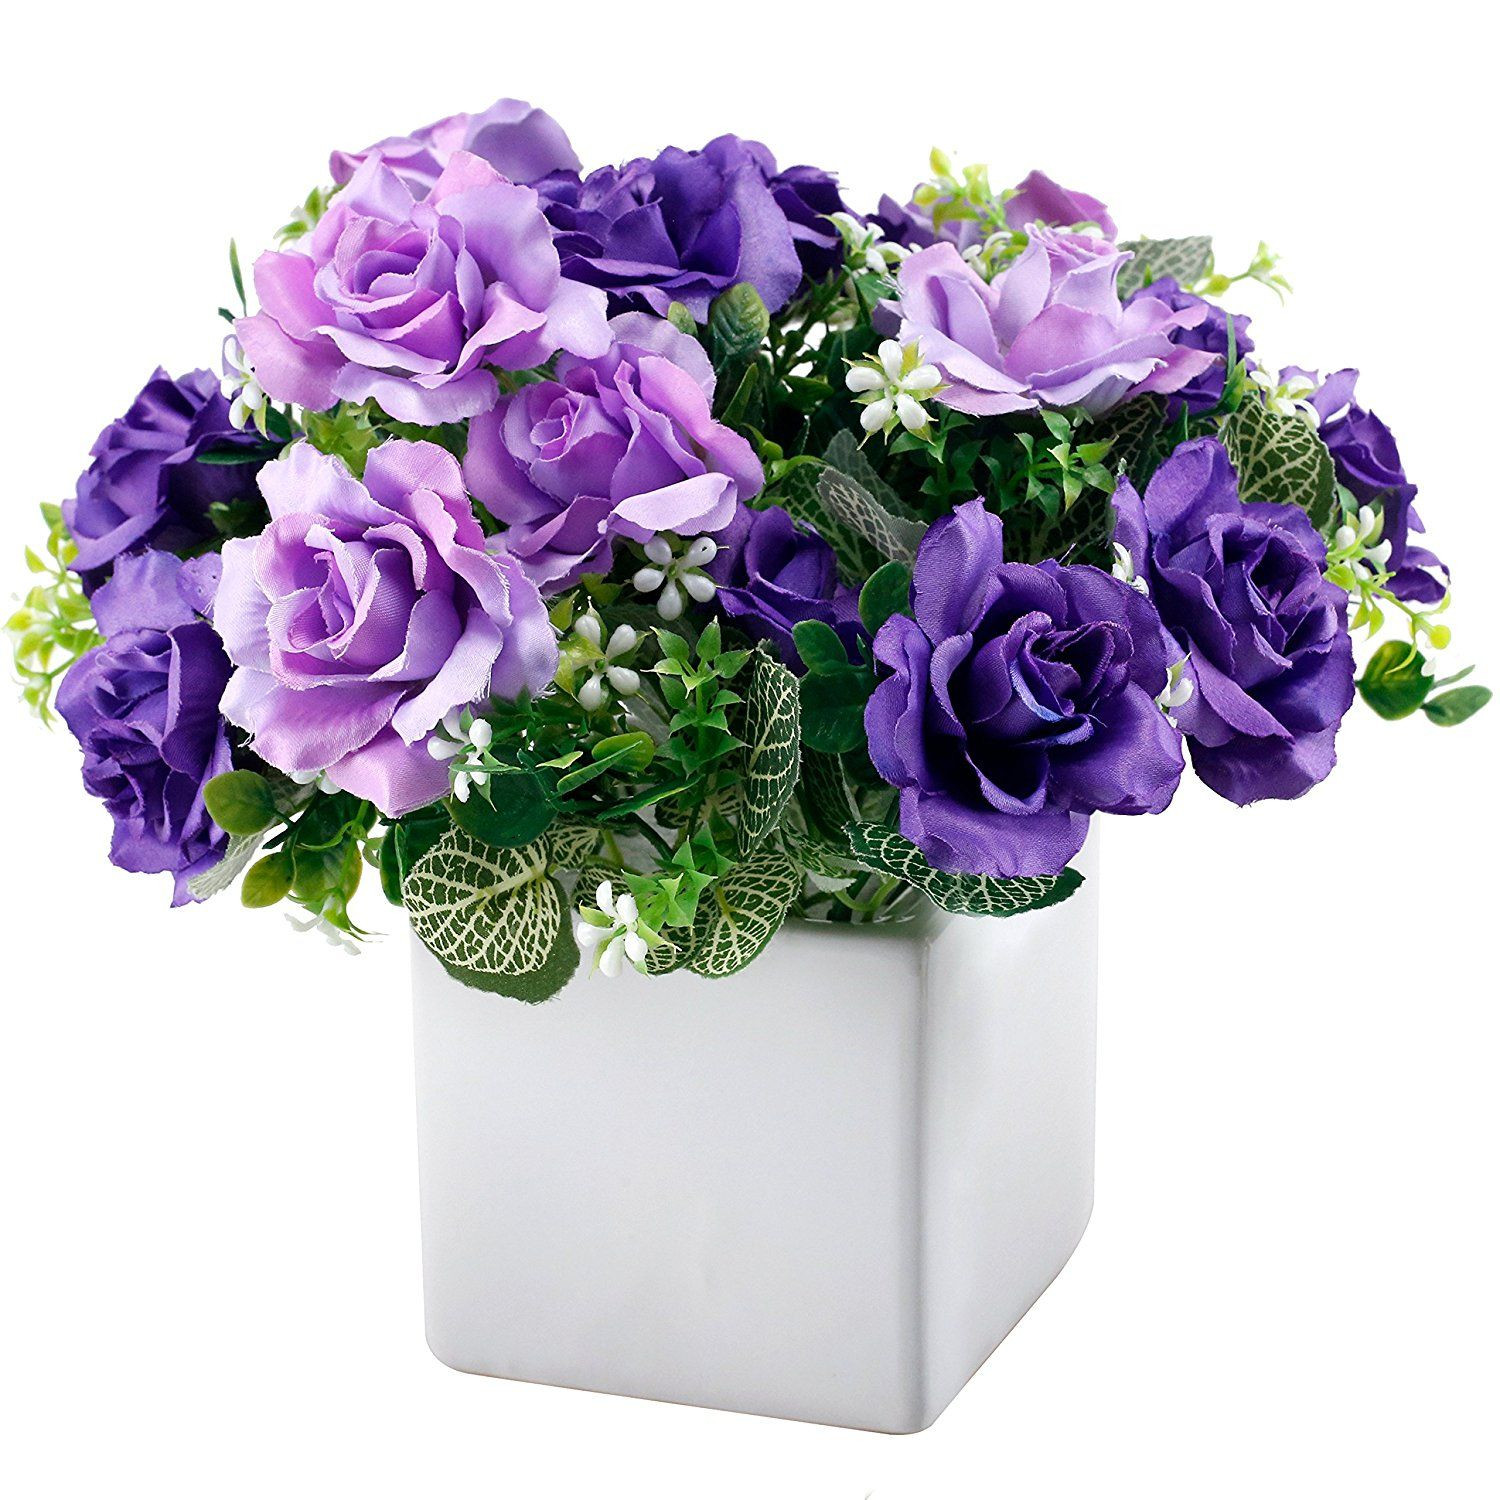 17 Fashionable Purple Artificial Flowers In Vase 2024 free download purple artificial flowers in vase of artificial purple rose flower arrangement in 4 inch square white in artificial purple rose flower arrangement in 4 inch square white ceramic vase learn